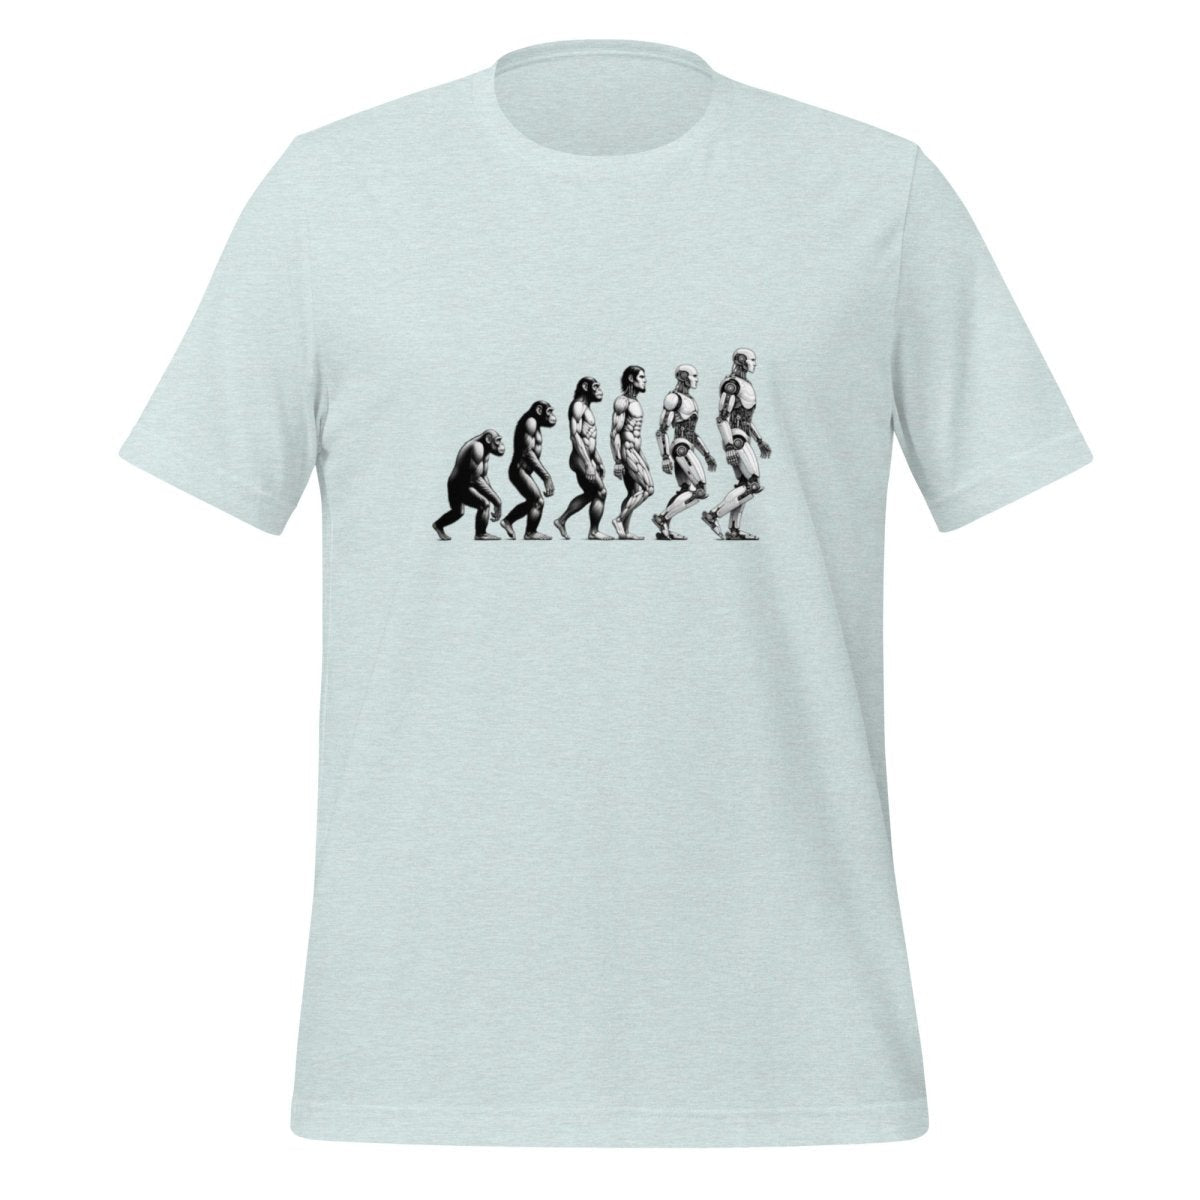 Human Evolution to Robot T - Shirt (unisex) - Heather Prism Ice Blue - AI Store